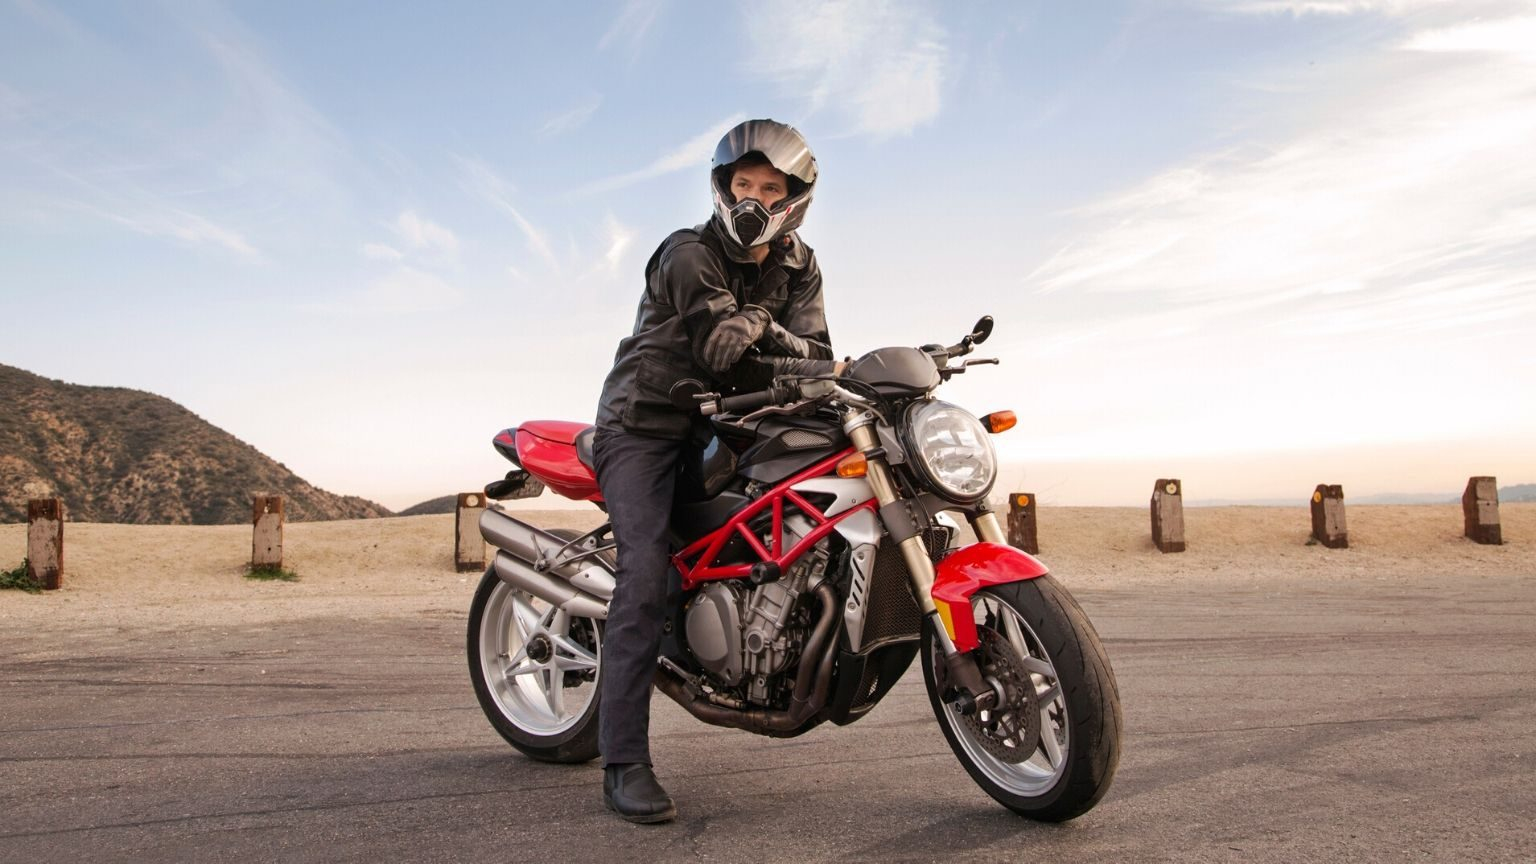 Compare Motorcycle Insurance To Protect Your Ride Finder intended for dimensions 1536 X 864